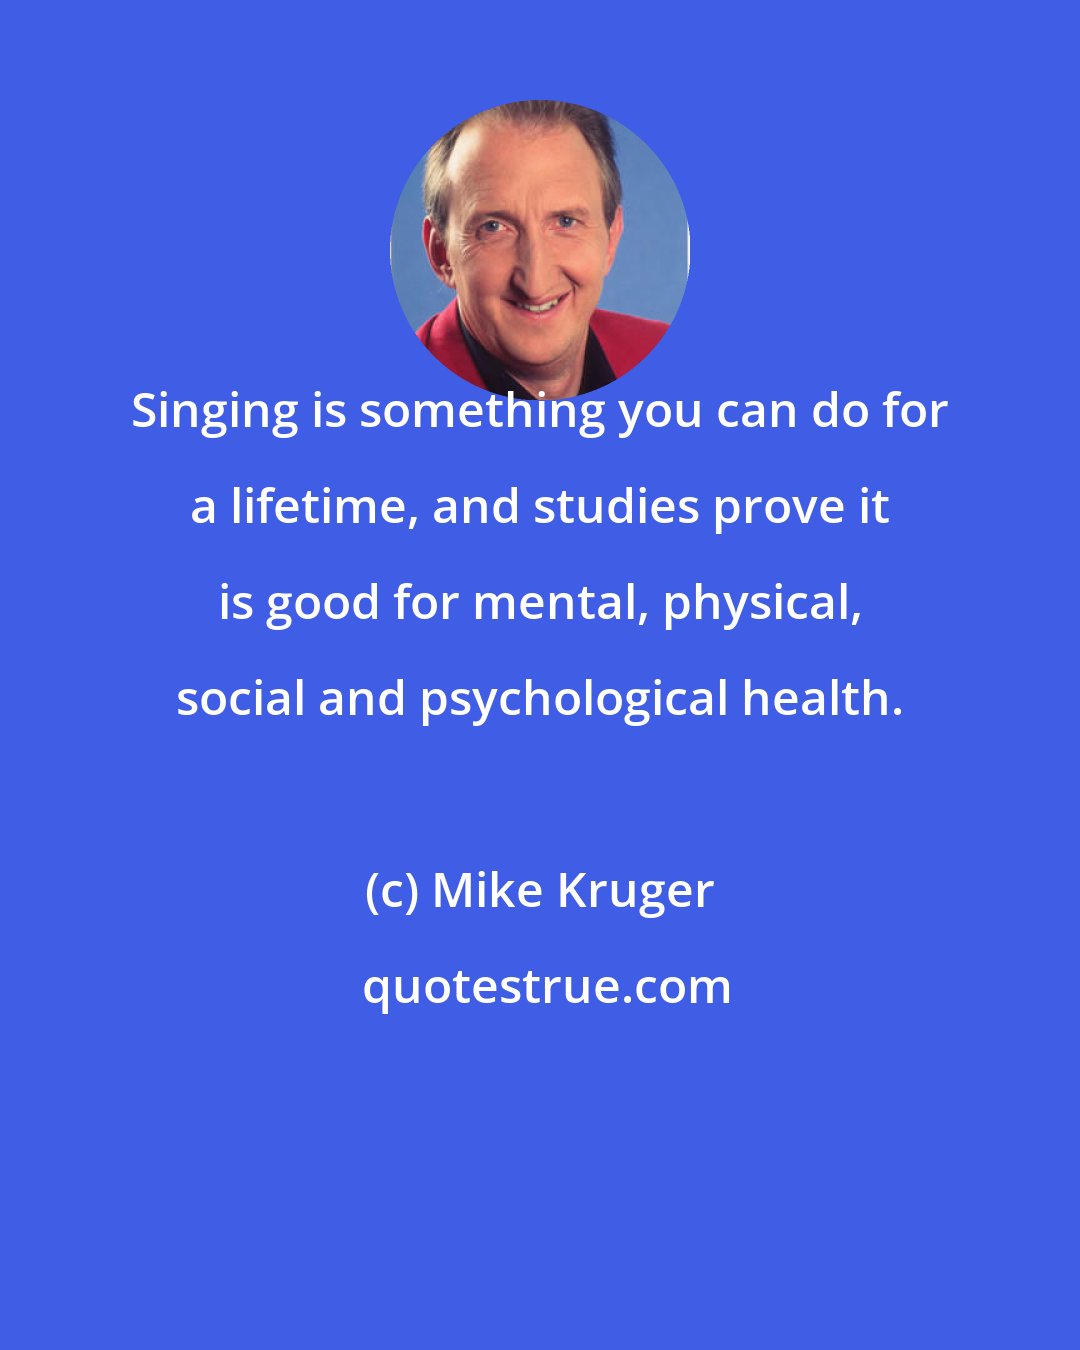 Mike Kruger: Singing is something you can do for a lifetime, and studies prove it is good for mental, physical, social and psychological health.